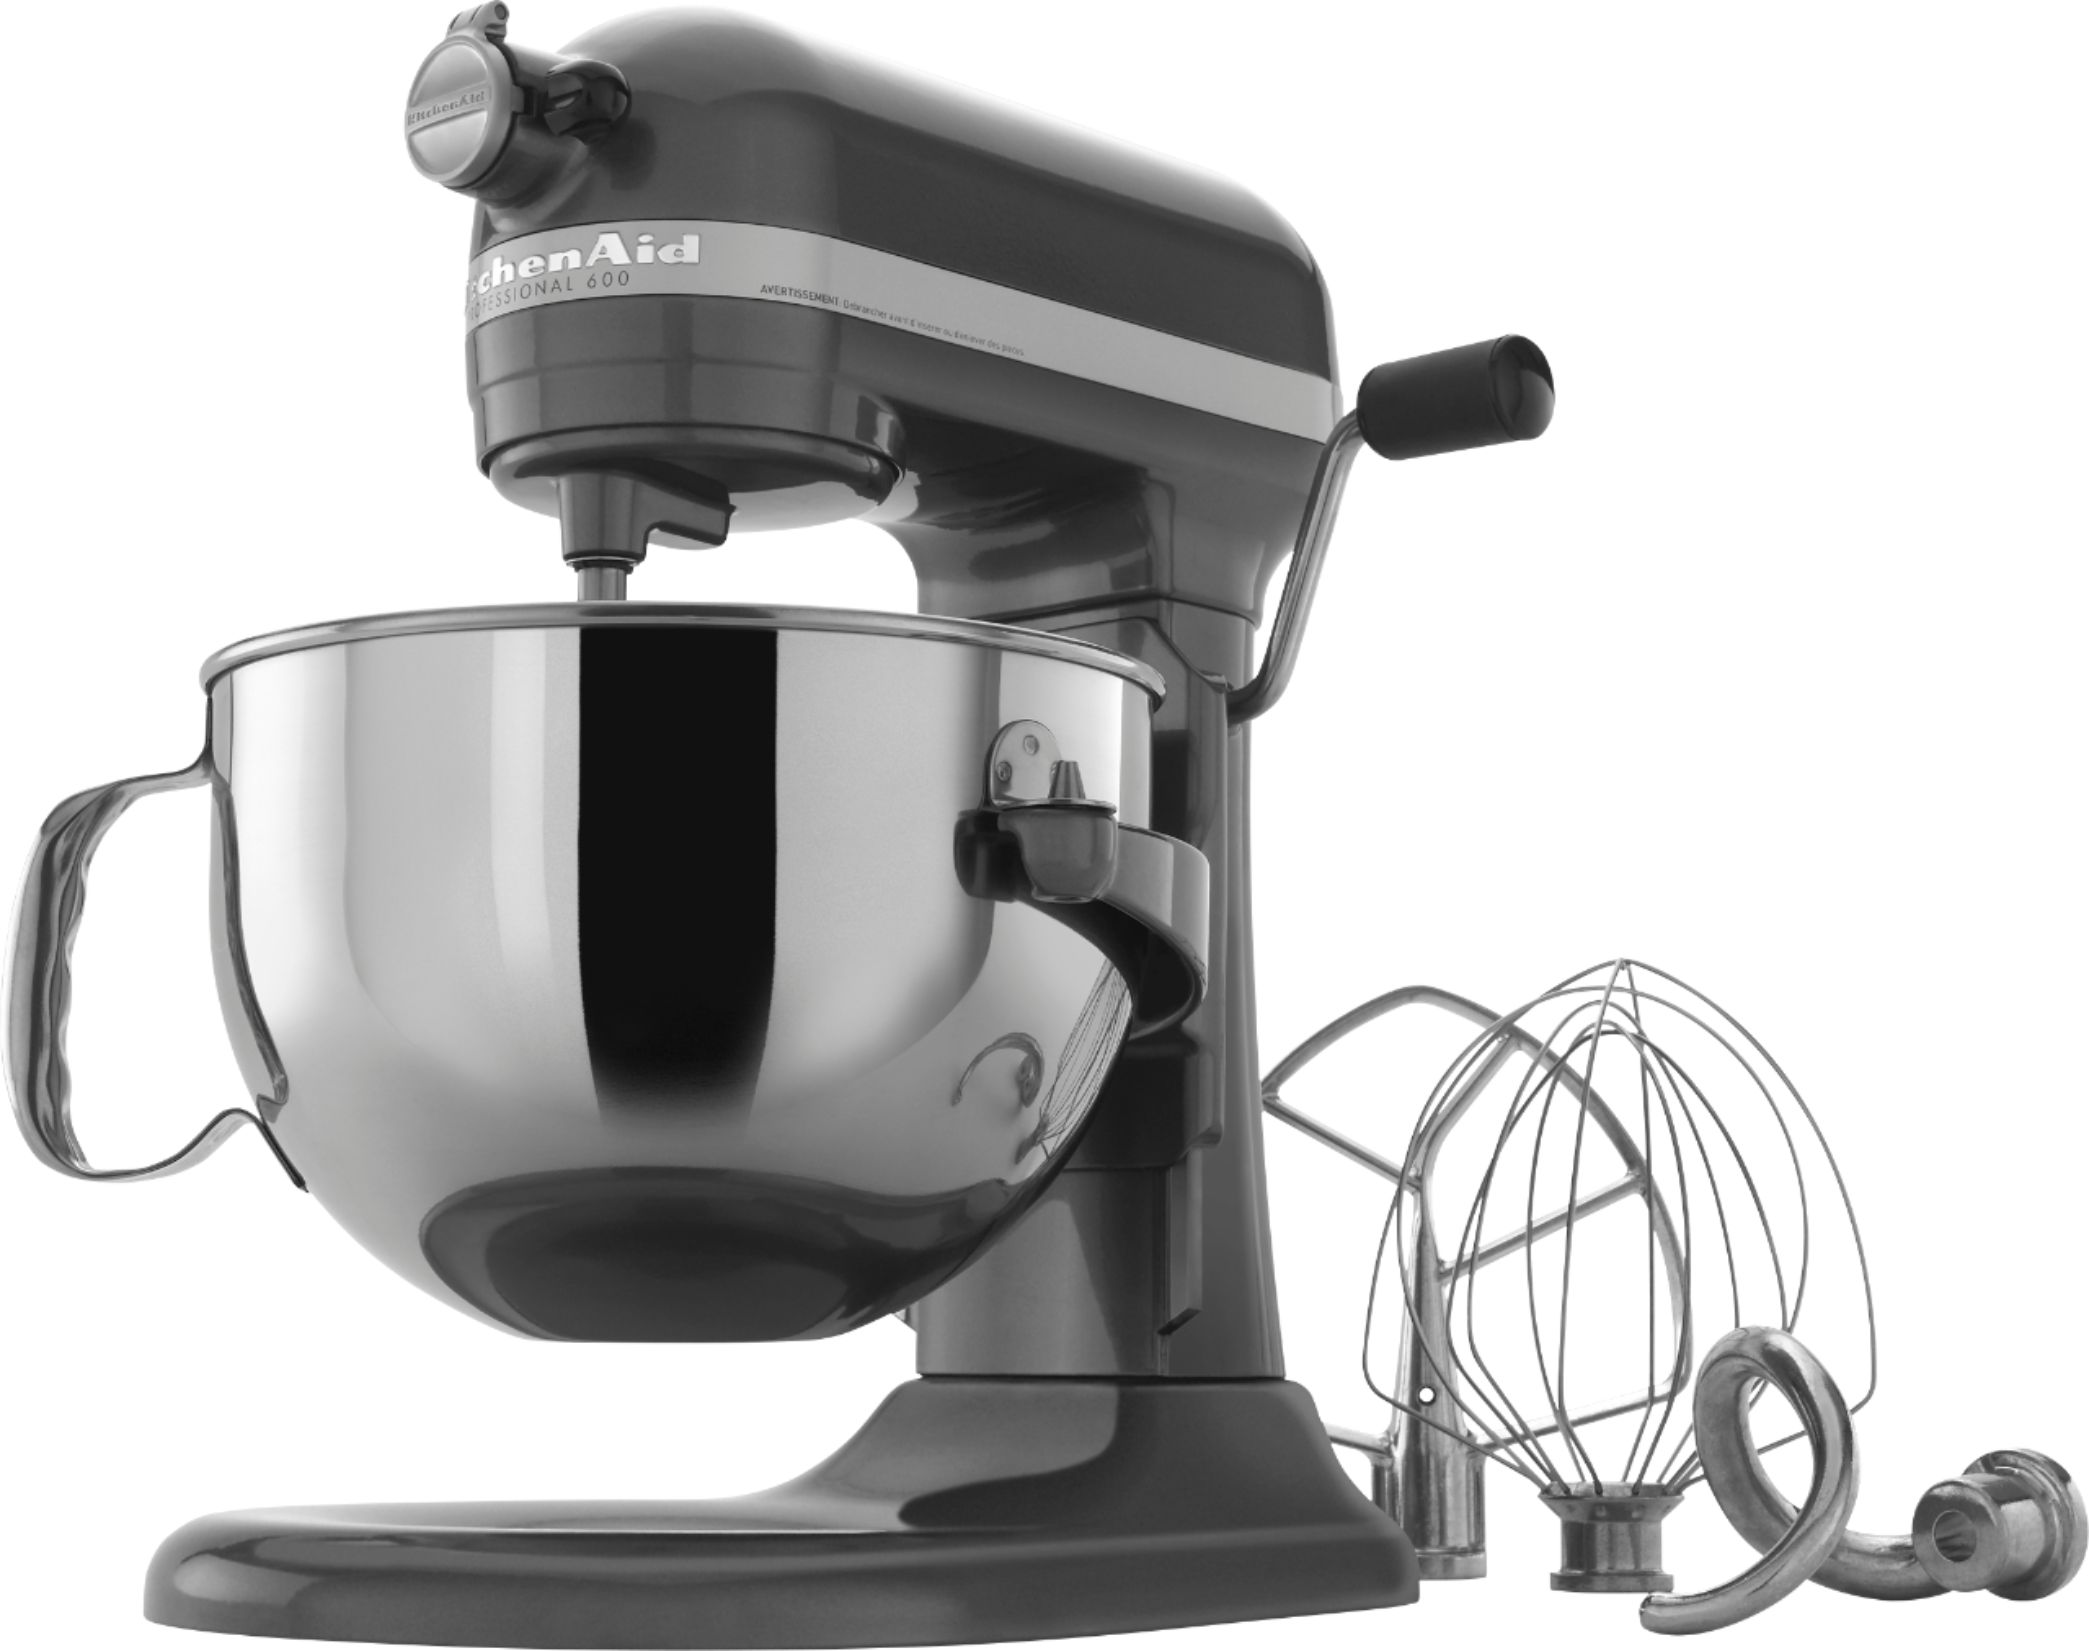  KitchenAid KP26M1XCE 6 Qt. Professional 600 Series Bowl-Lift  Stand Mixer - Copper Pearl: Electric Stand Mixers: Home & Kitchen